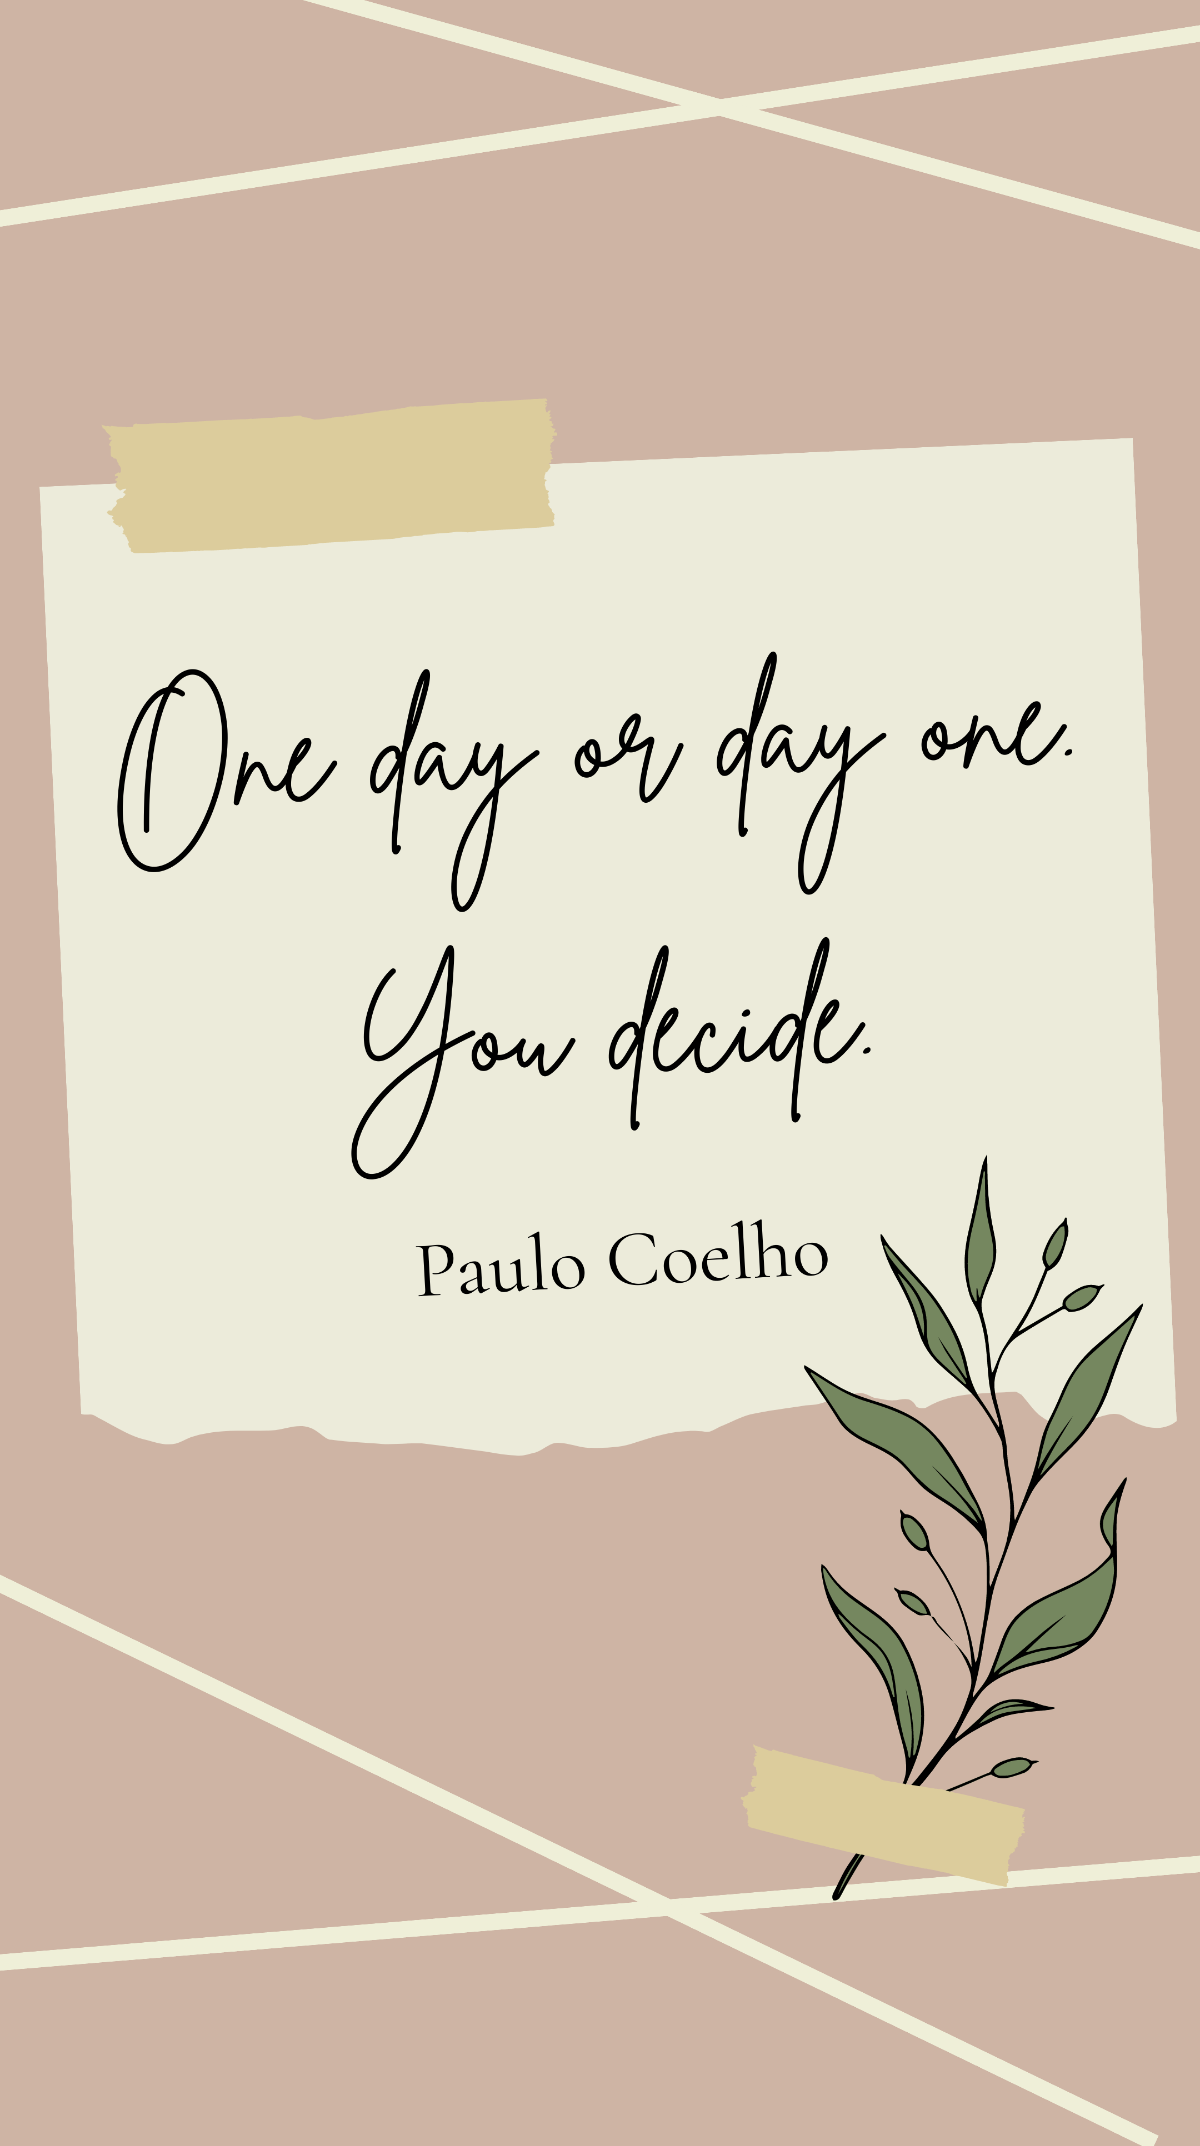 Paulo Coelho - “One day or day one. You decide.” Template